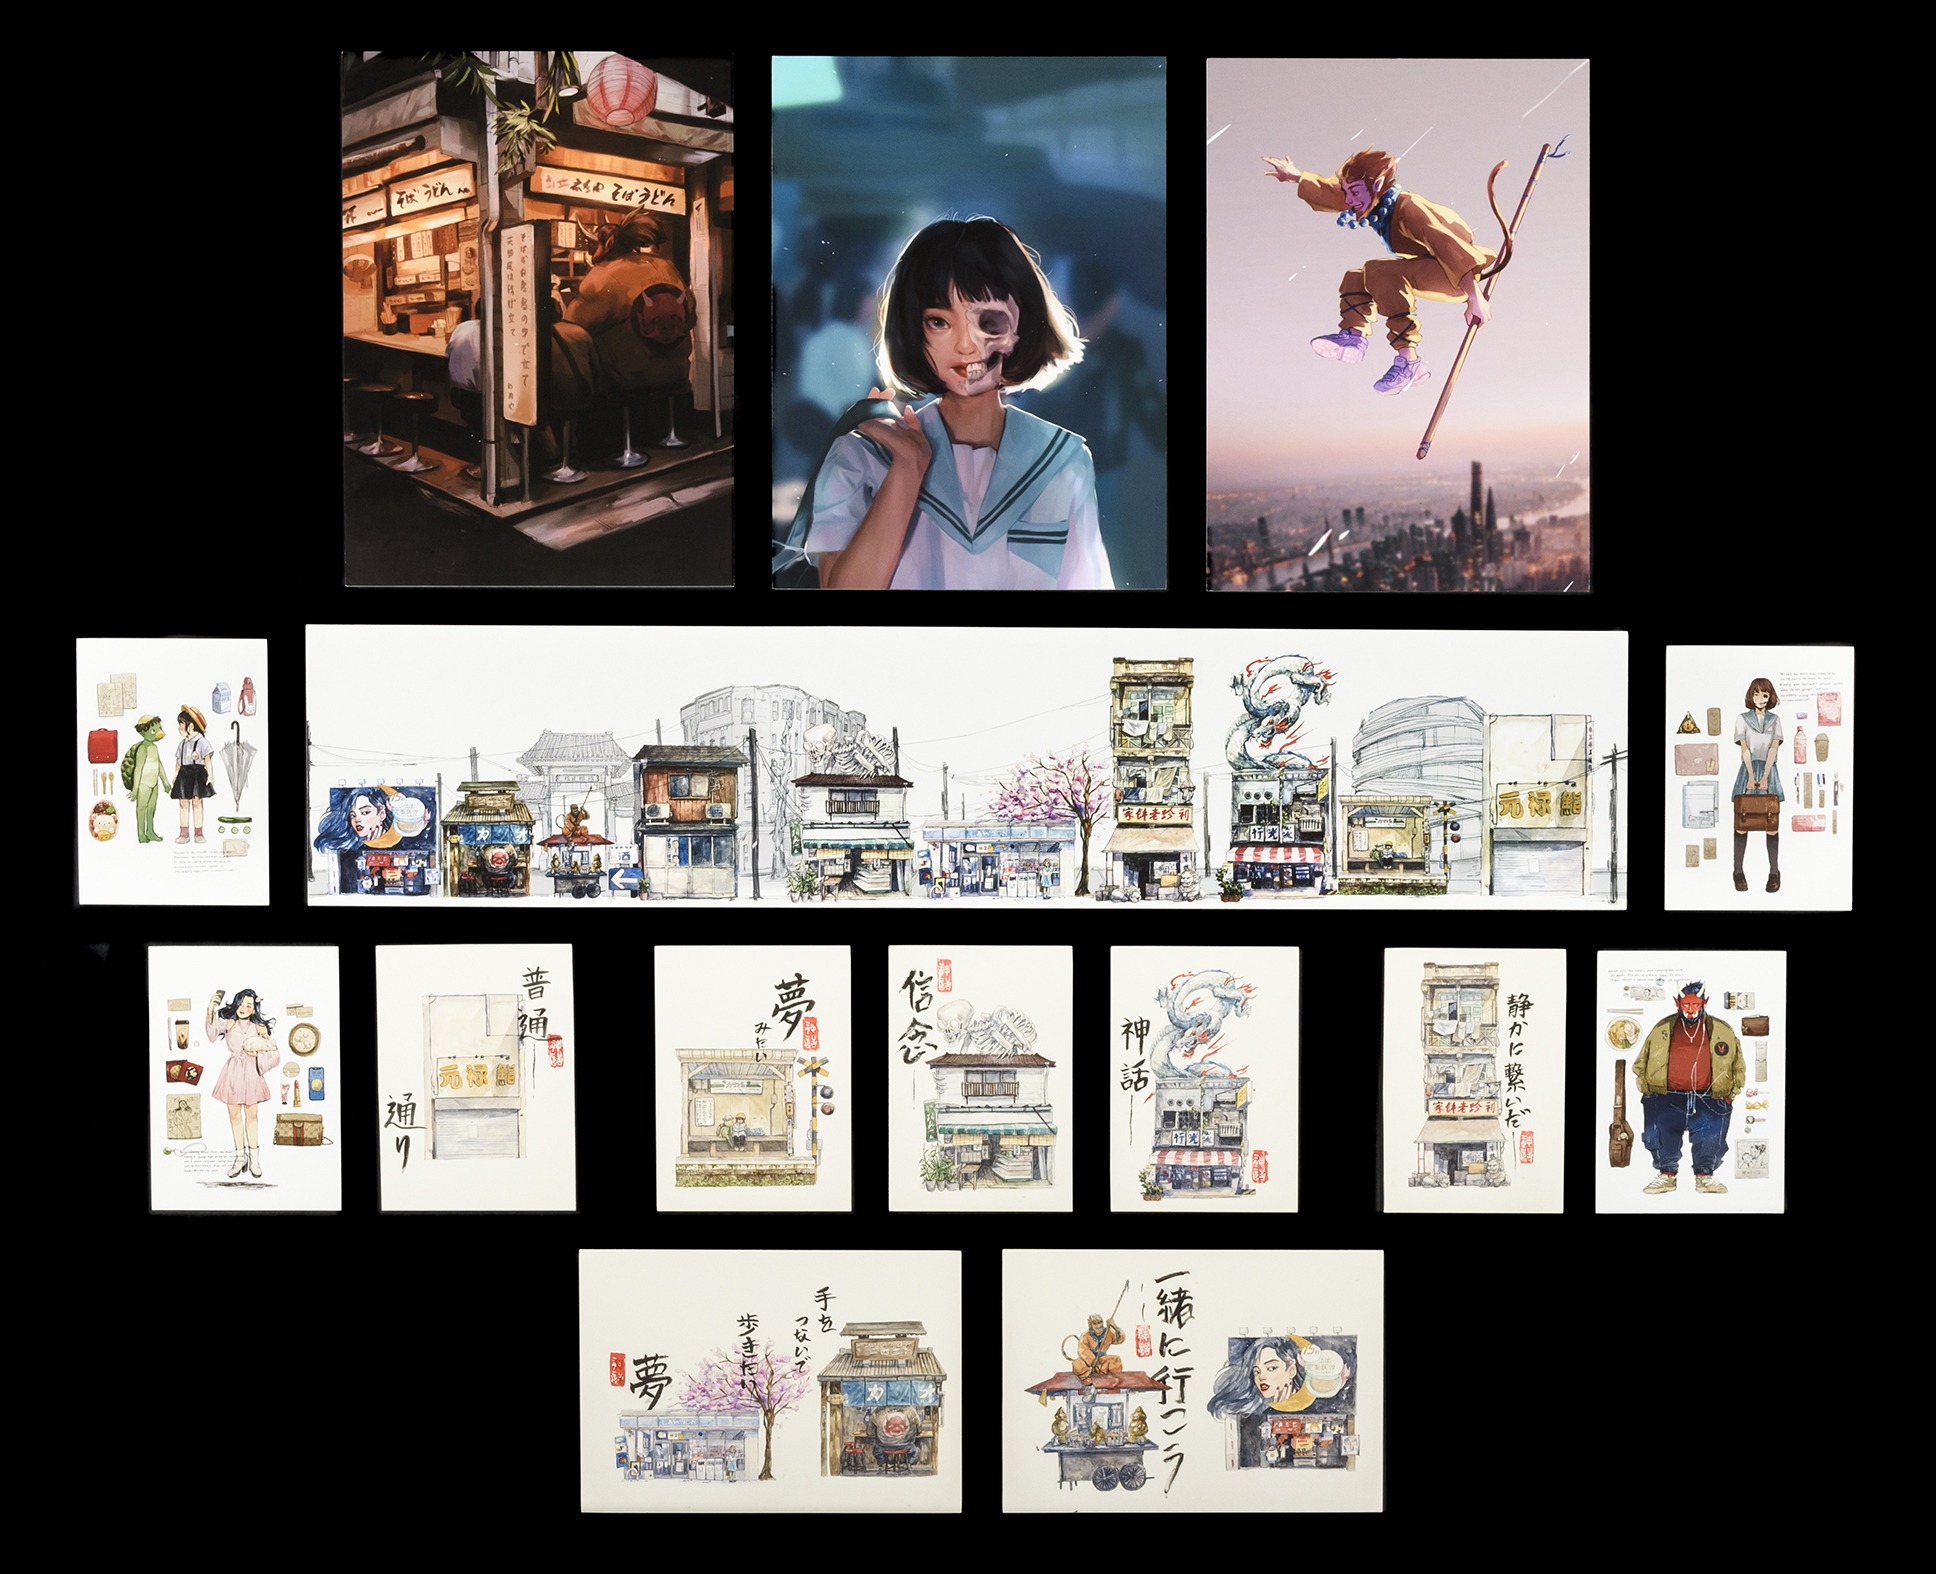 Three large graphic design works and twelve small water colour works depicting scenes, people and places inspired by Japan and Japanese culture.